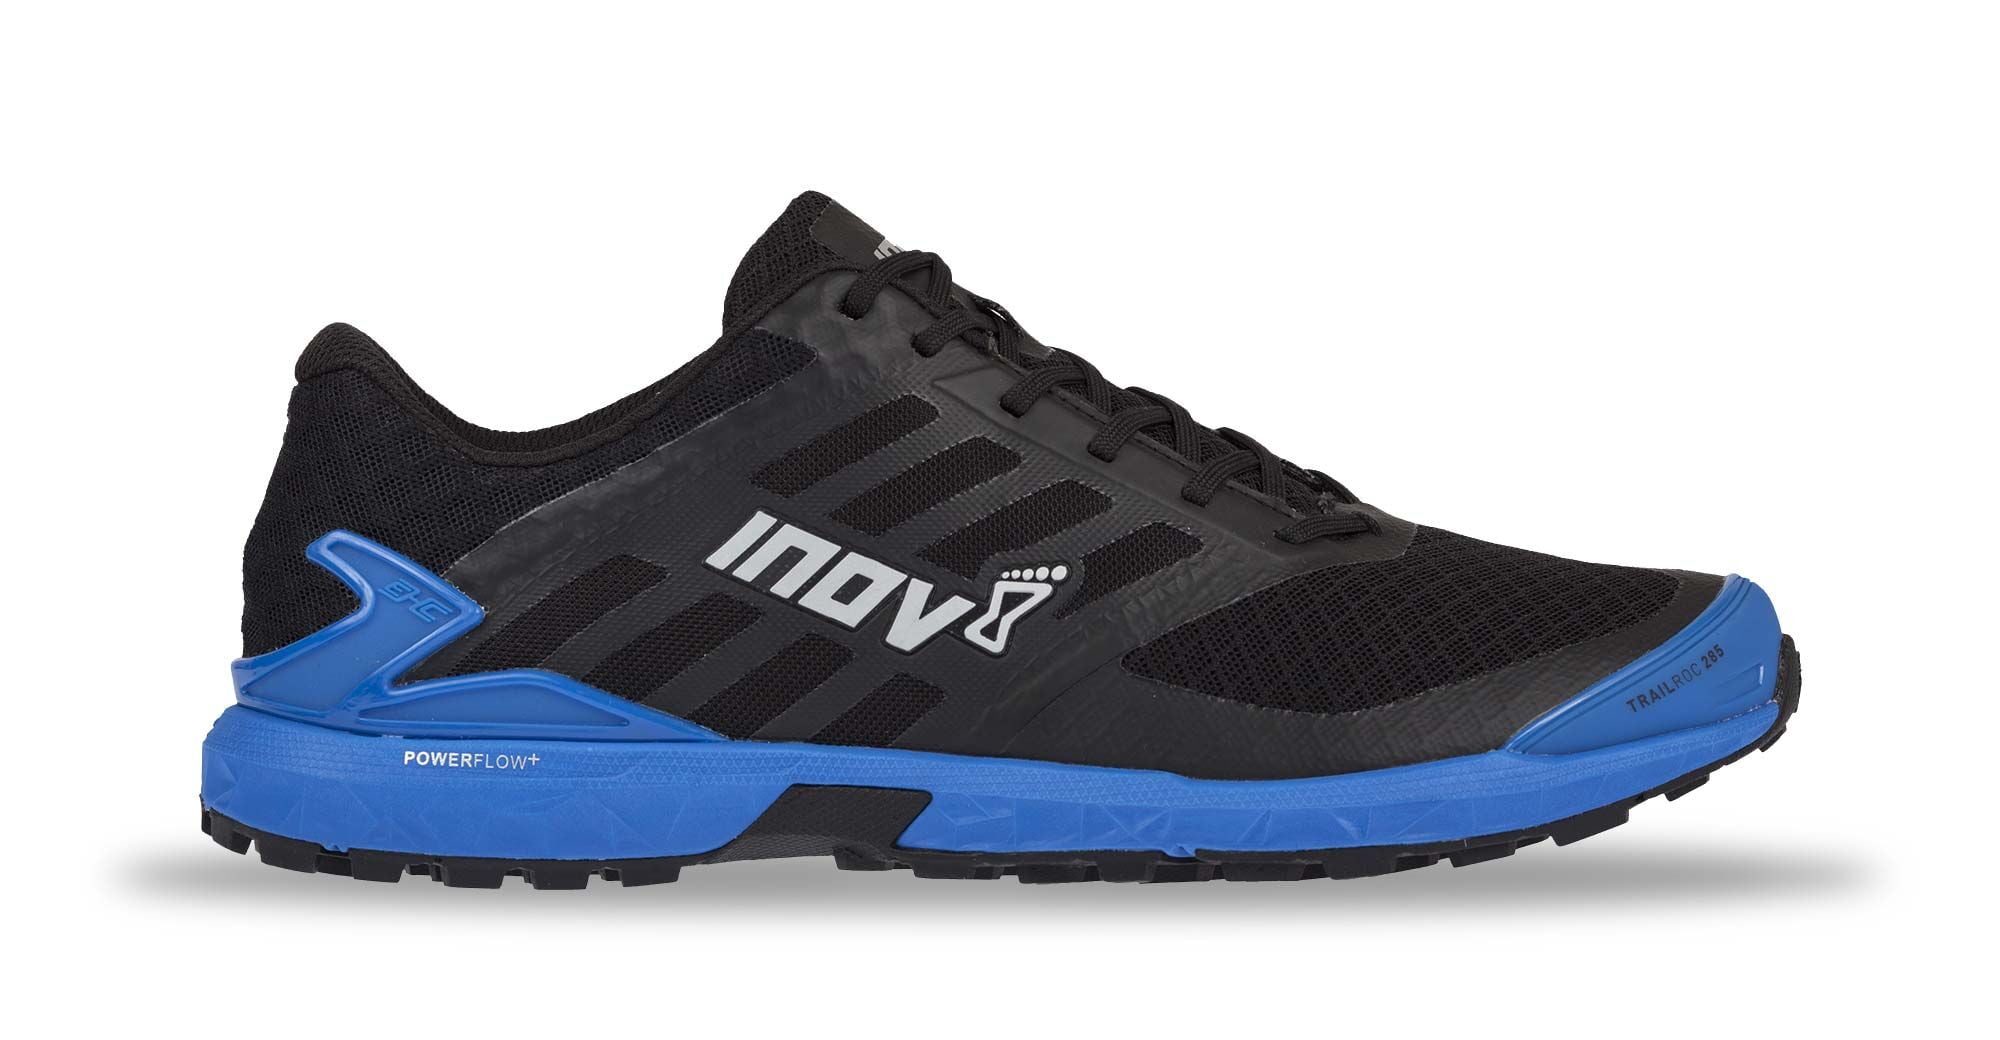 Inov8 Womens Trailroc 285 Trail Running Shoes Trainers Sneakers Black Blue 